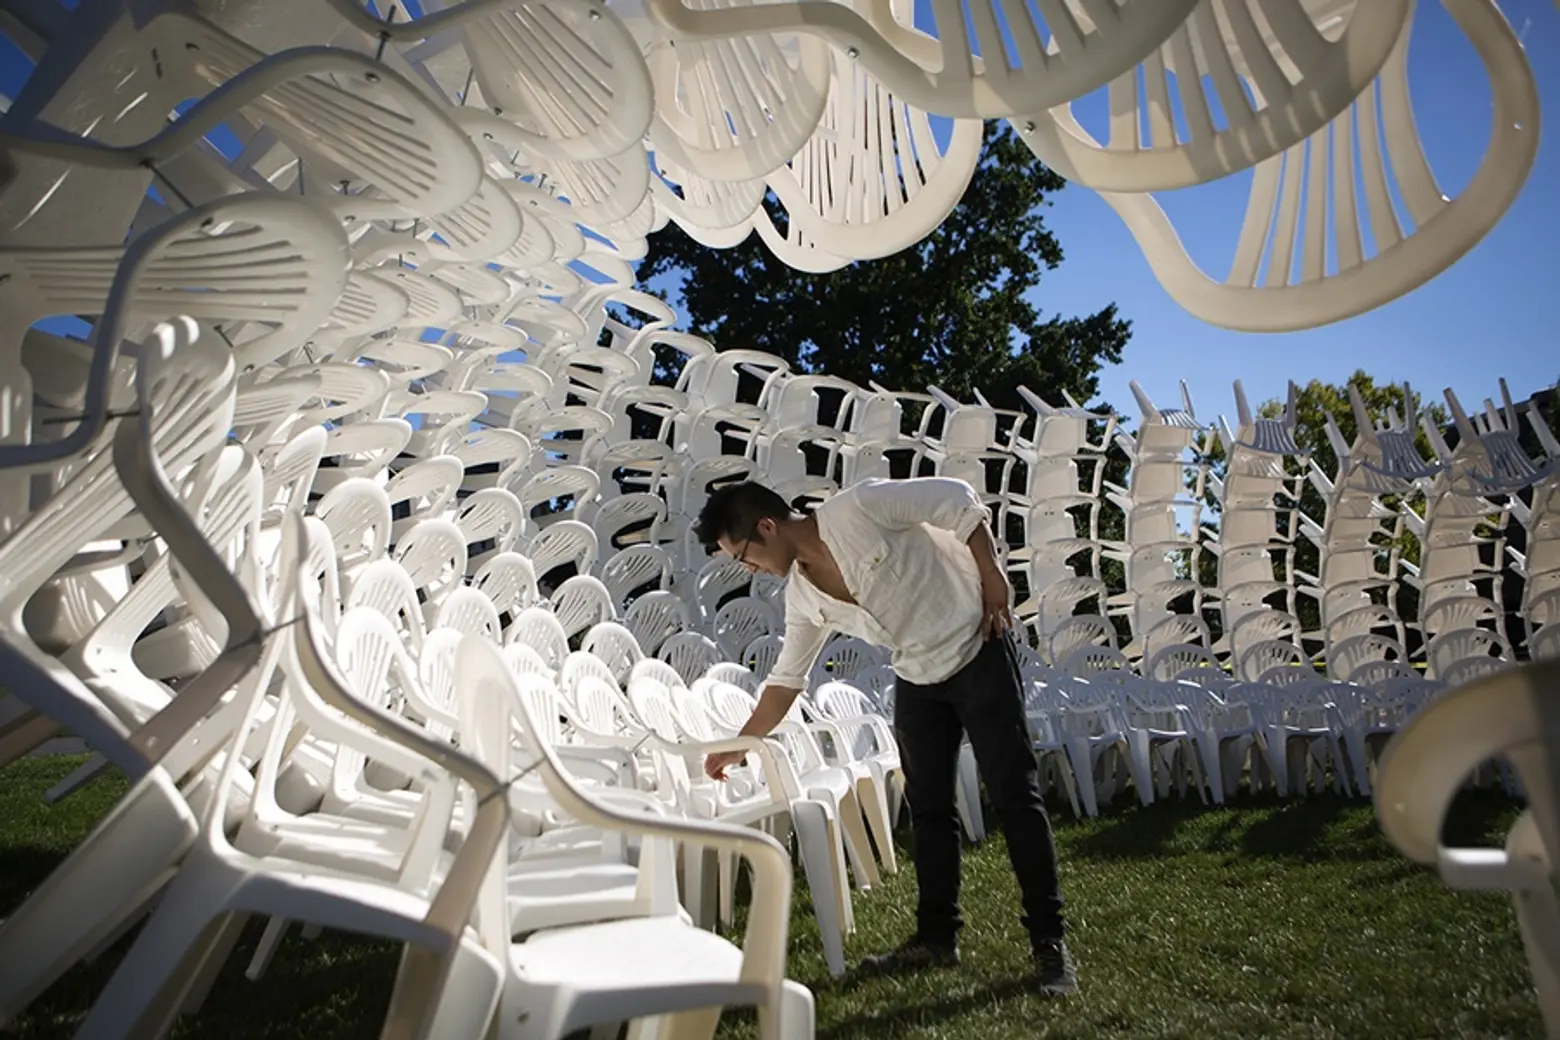 AA&P student John Lai '17 works on the CCA Biennial project by CODA, a design practice led by Caroline O'Donnell. Urchin rethinks the common plastic chair whose aggregation forms a space in which the chair itself loses its meaning as an object that affords sitting and becomes instead an architectural surface whose formal and material qualities are allowed to come to the fore.